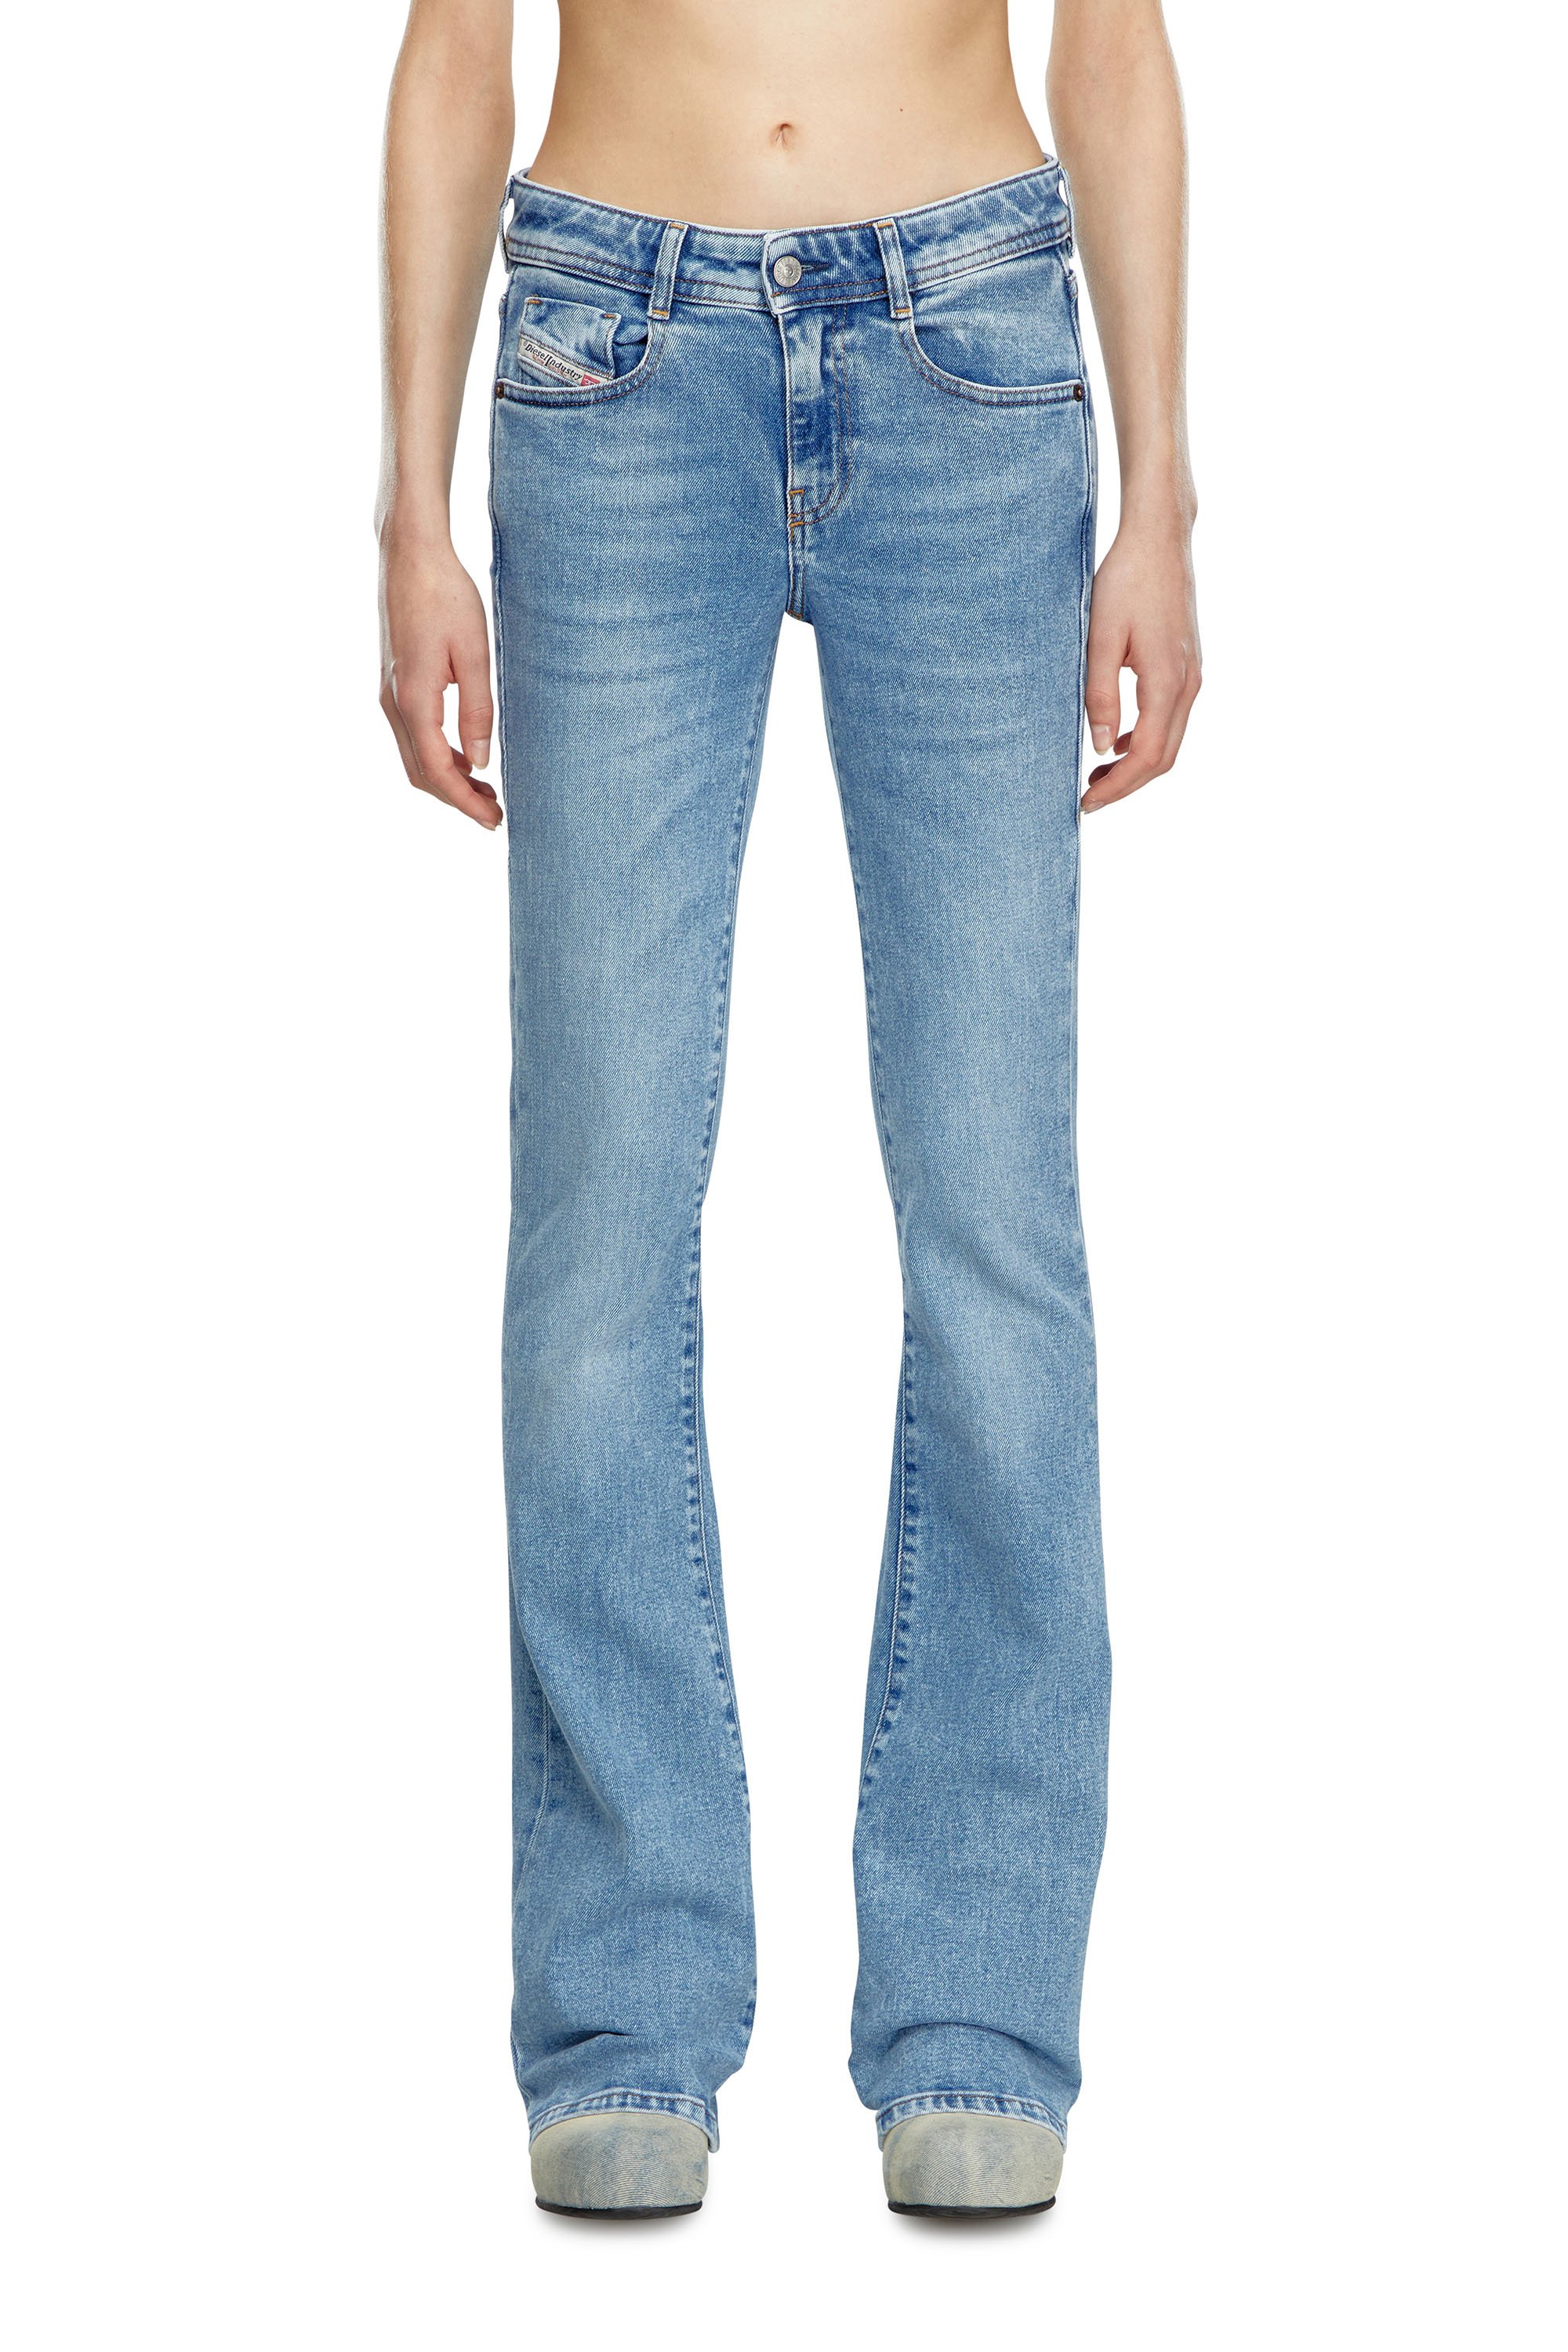 Bootcut and Flare Jeans 1969 D-Ebbey 9B92L, Light Blue